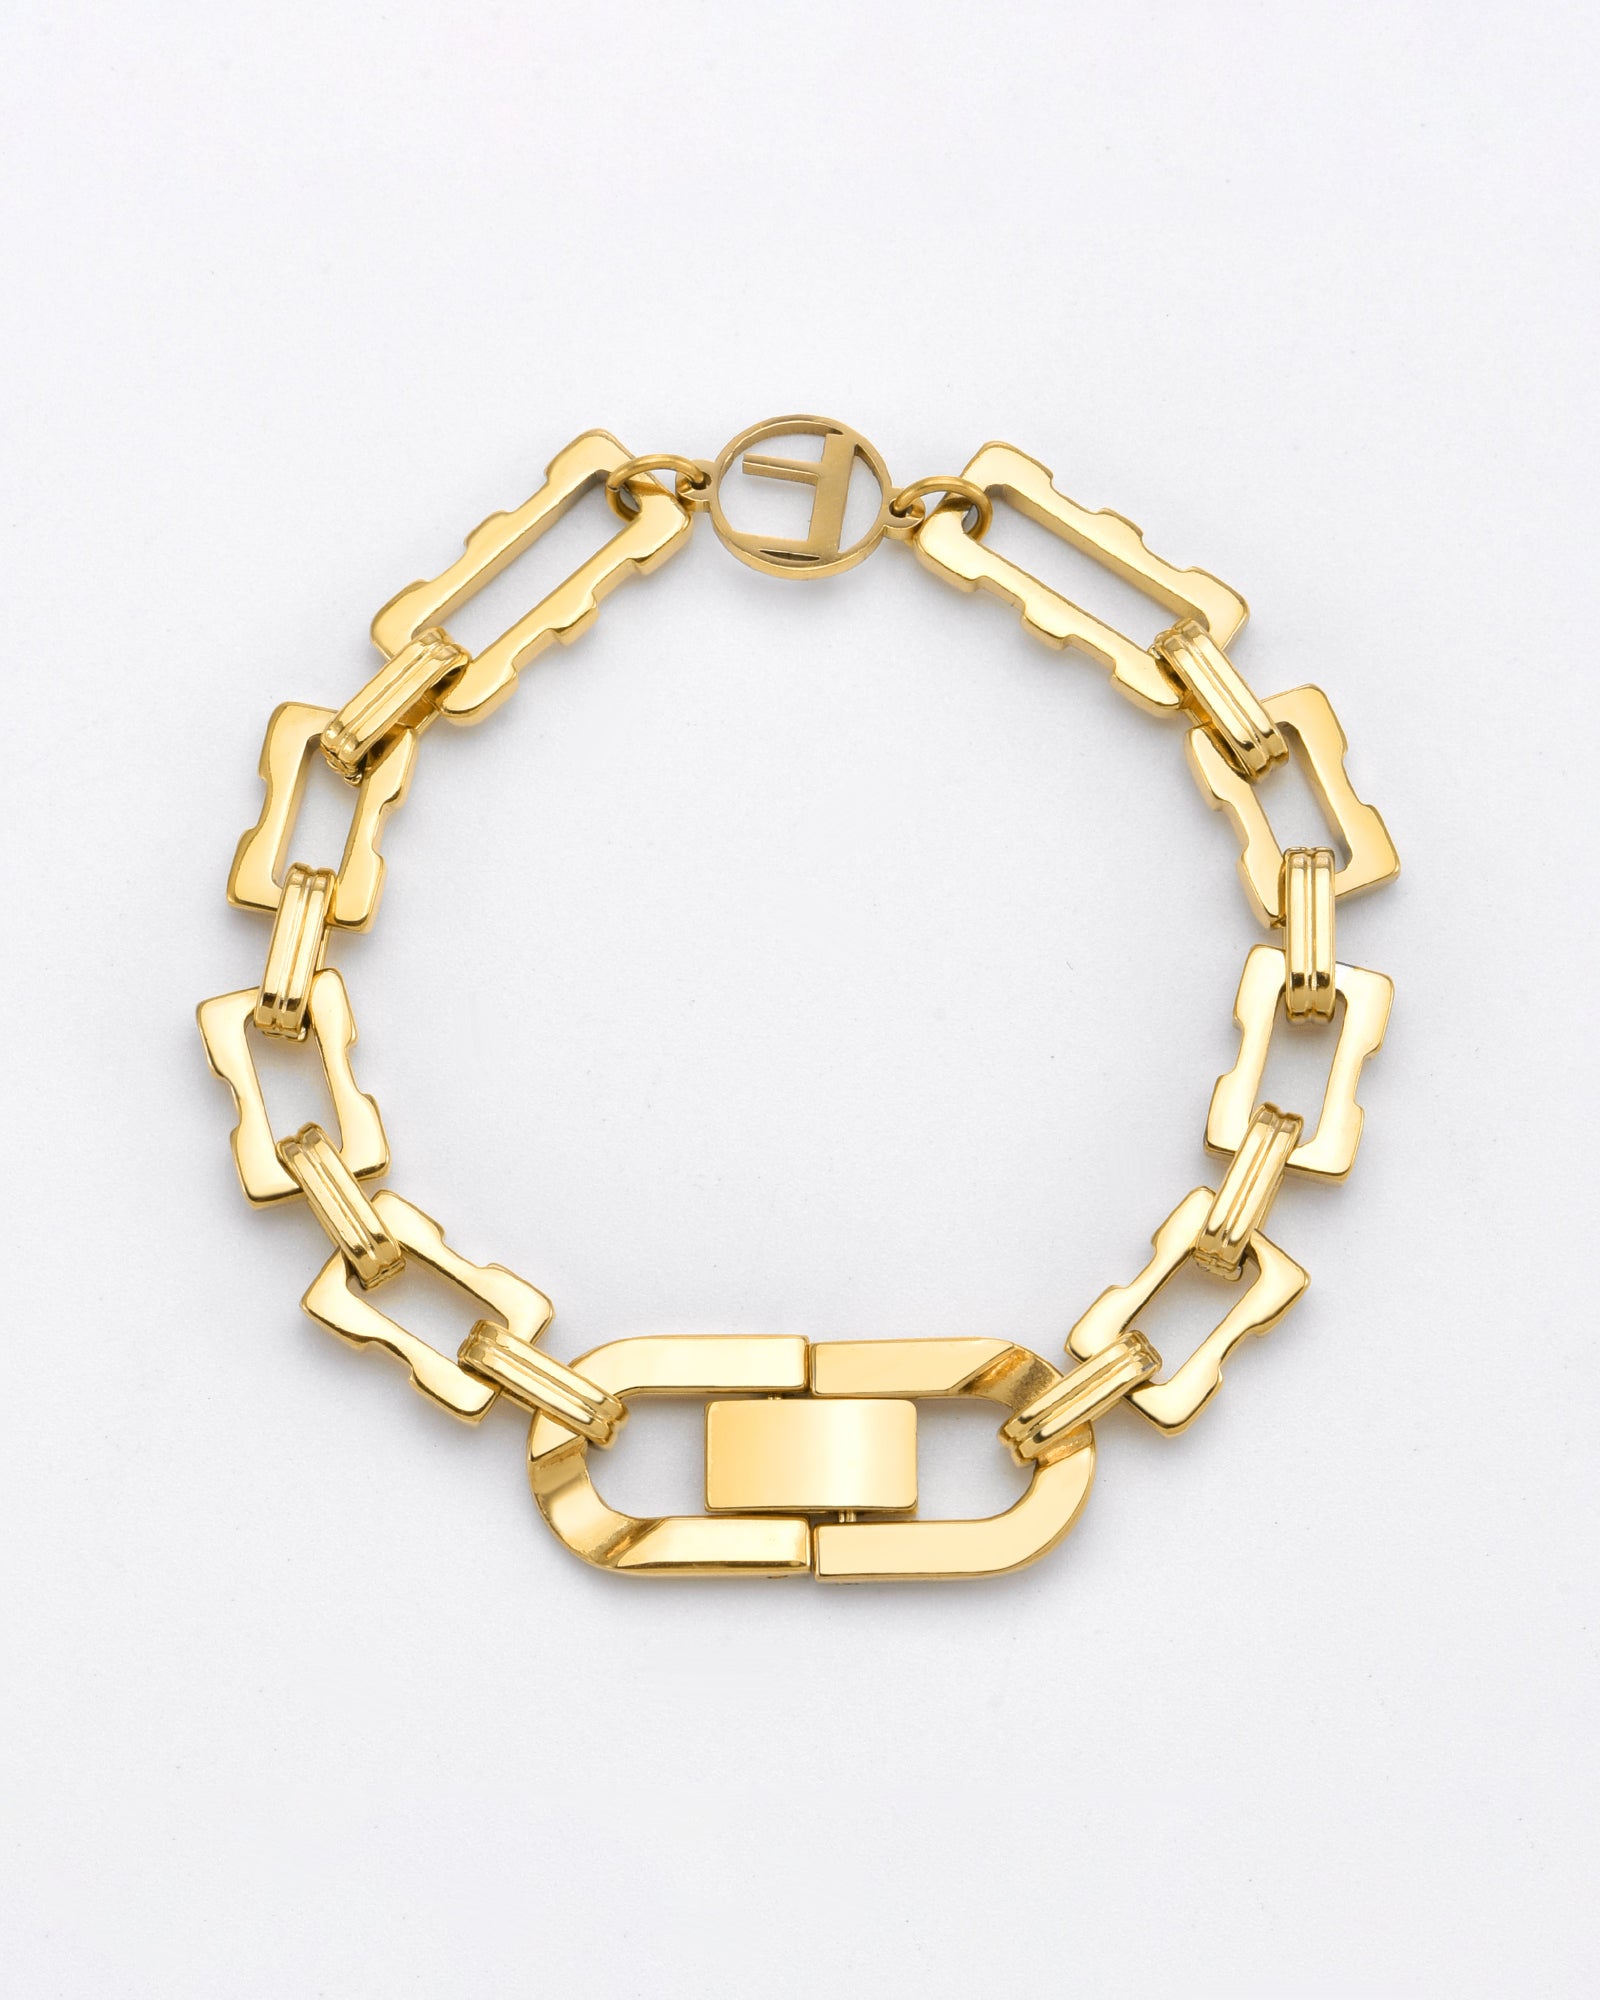 A 24k gold-plated bracelet with an XL link chain design. The Links Bracelet Gold by For Art's Sake® features interconnected rectangular links and a larger central clasp with a circular detail near the clasp. Hypoallergenic, the overall design is elegant and modern, set against a plain white background.